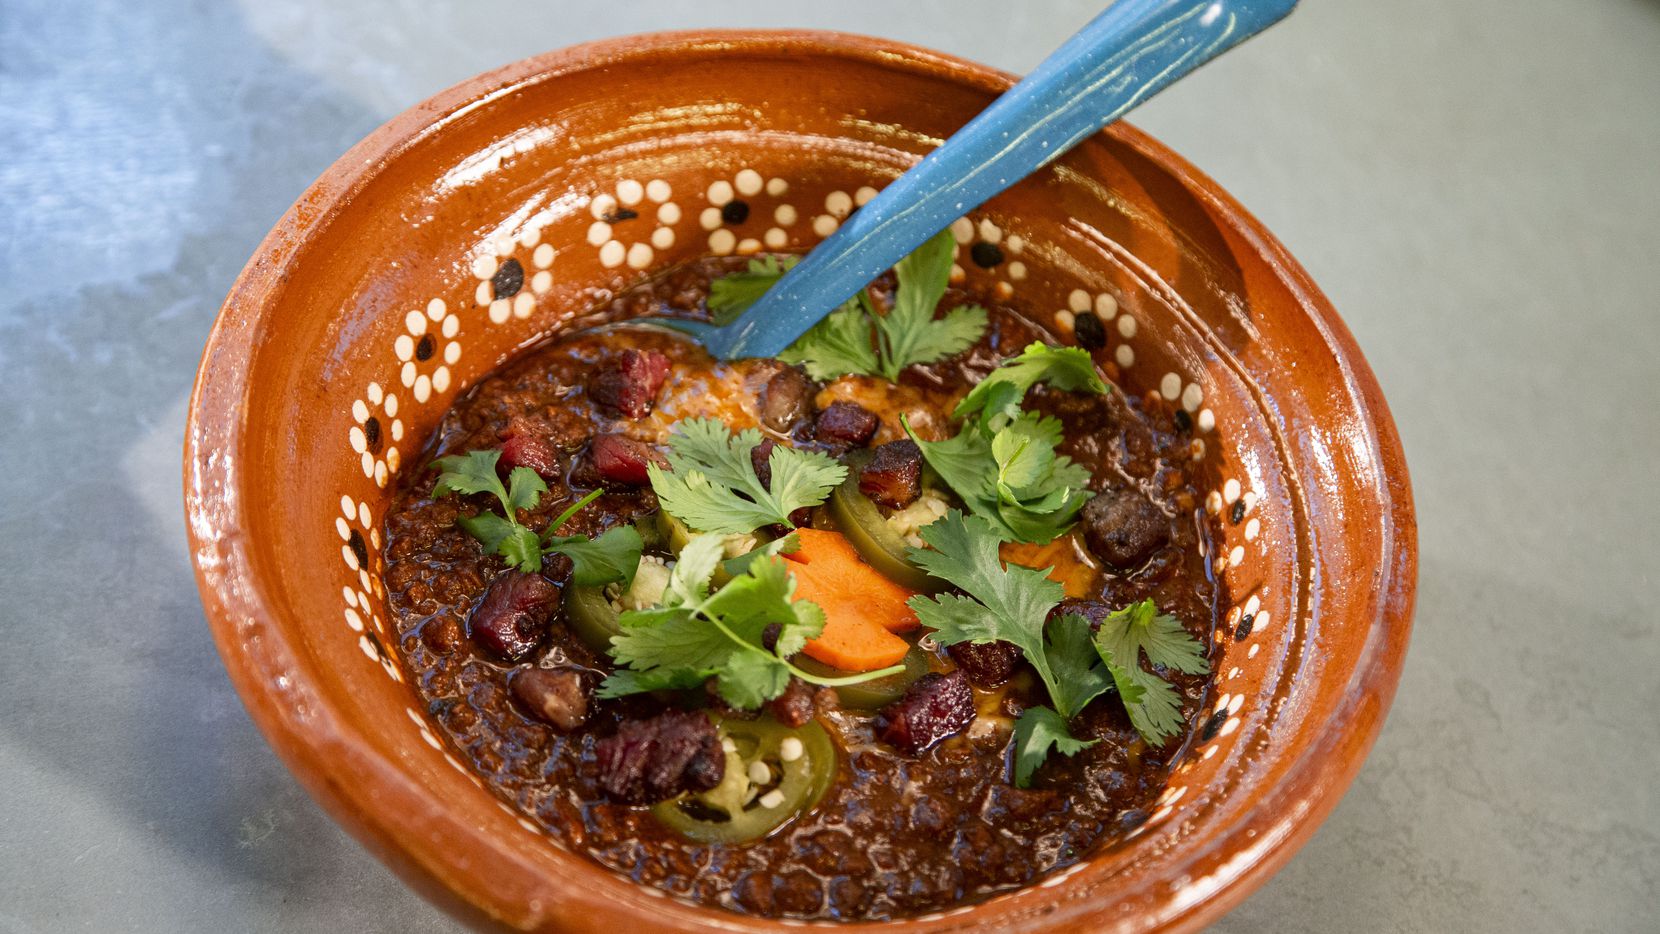 It’s chili time: Here are our 7 favorite bowls of red in Dallas